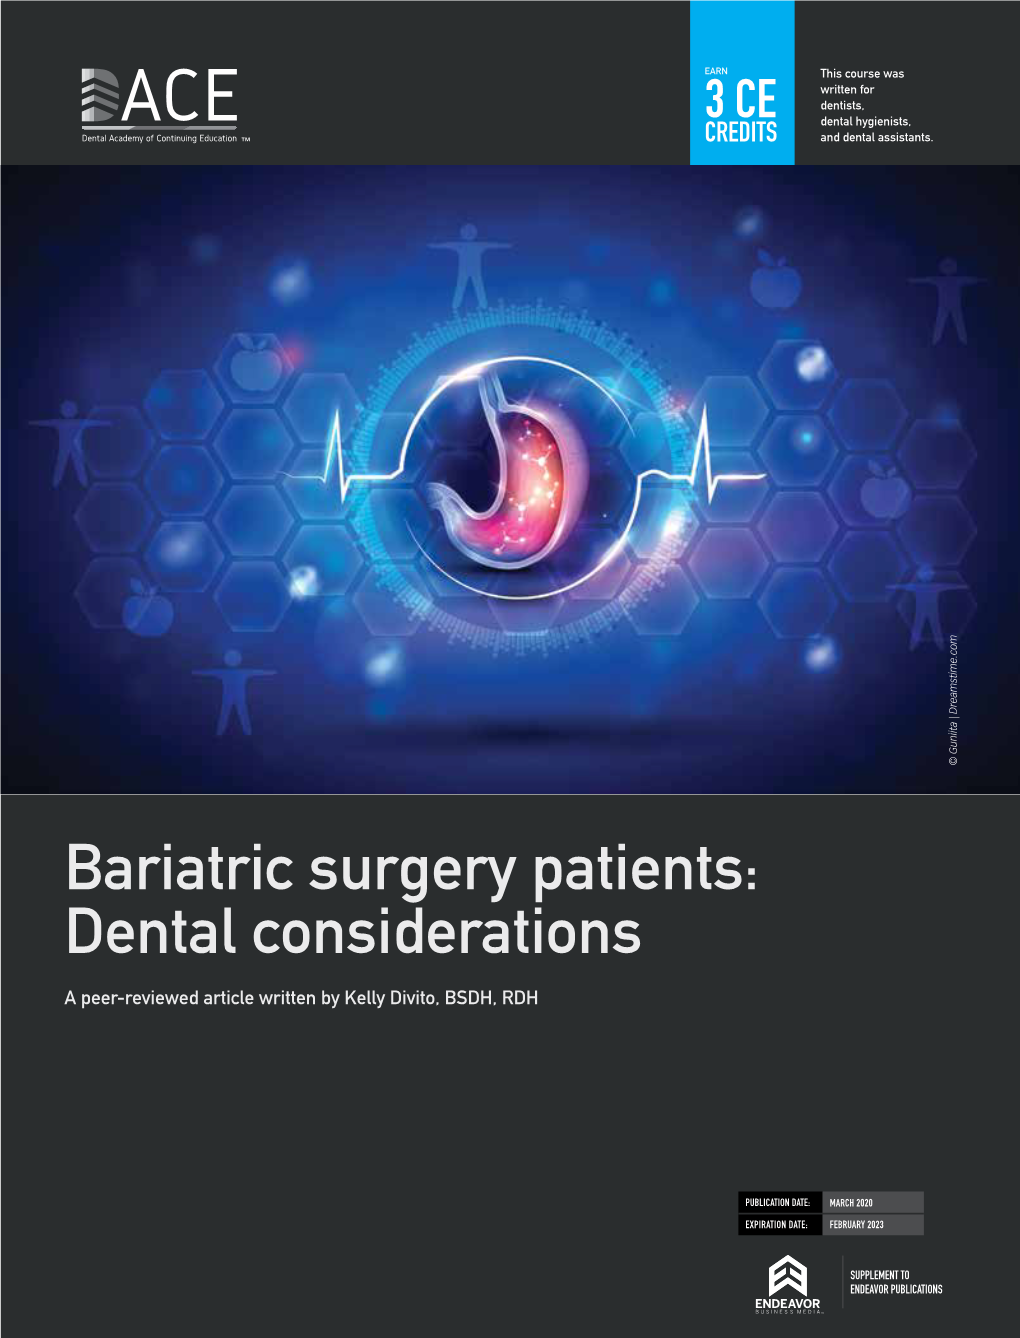 Bariatric Surgery Patients: Dental Considerations